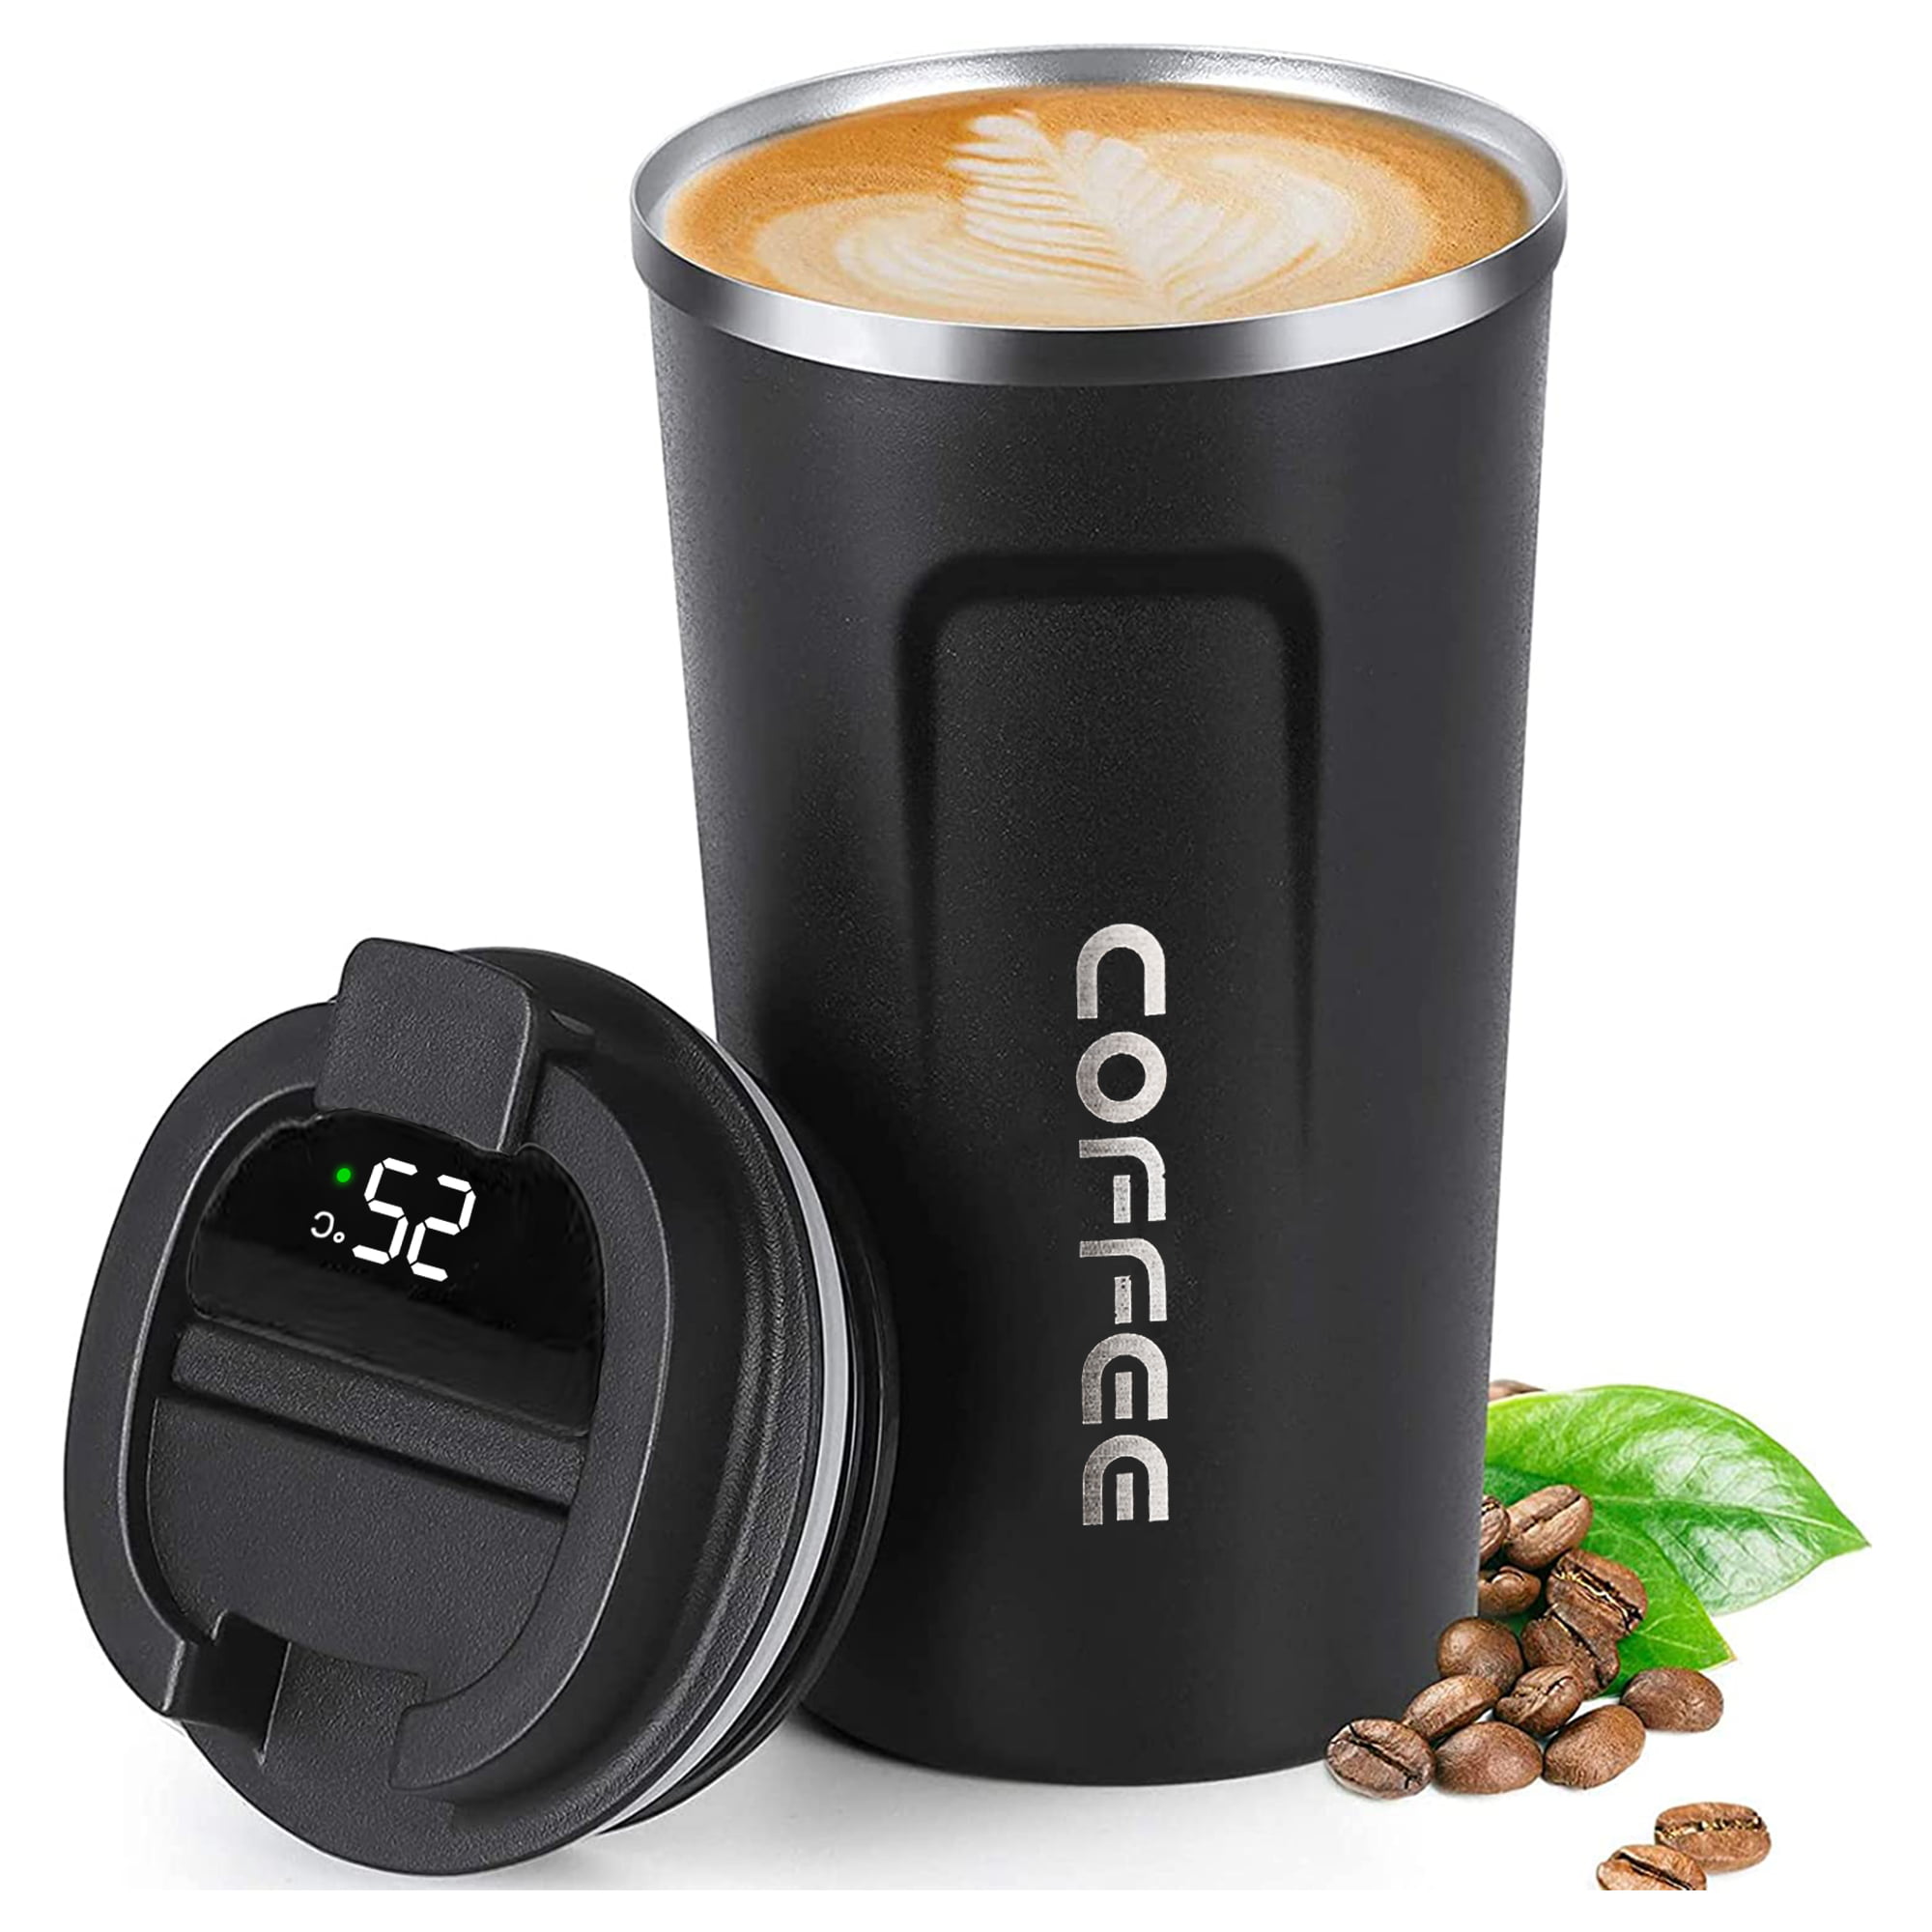 Brand: Thermoboss Type: Stainless Steel Thermos Cup Specs: 40oz, Vacuum  Insulated Keywords: Coffee Tumbler, Portable, Double Layer, Car Mug, Travel  Water Key Points: Durable, Leak Proof, Easy To Clean Main Features: Handle